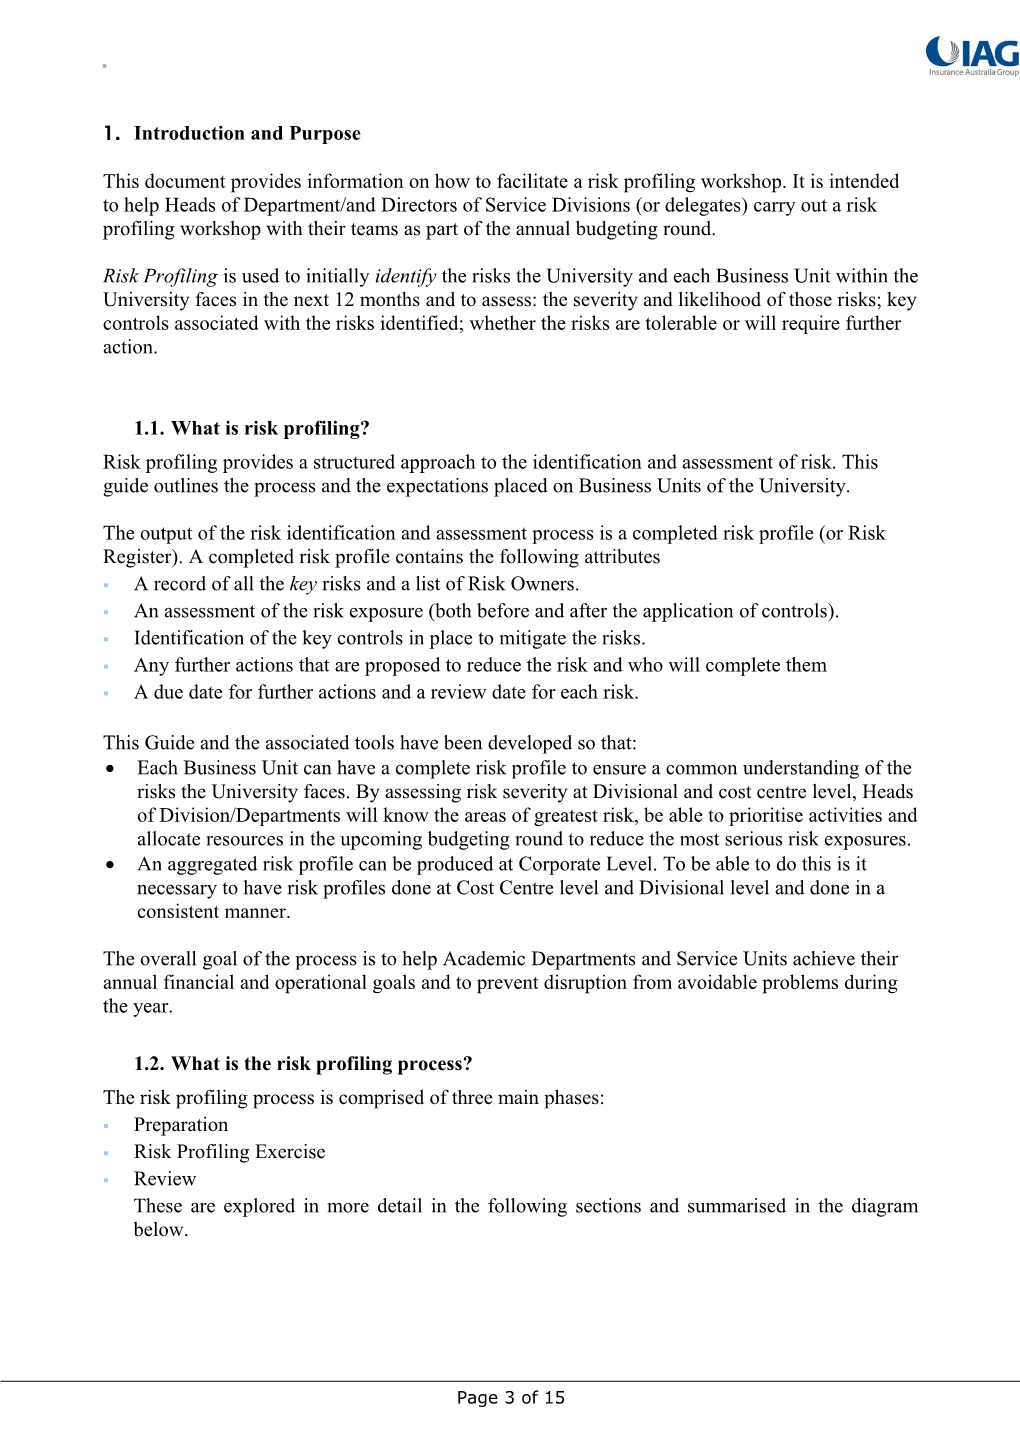 Guideline Document (Msword Format) from Pilot Project